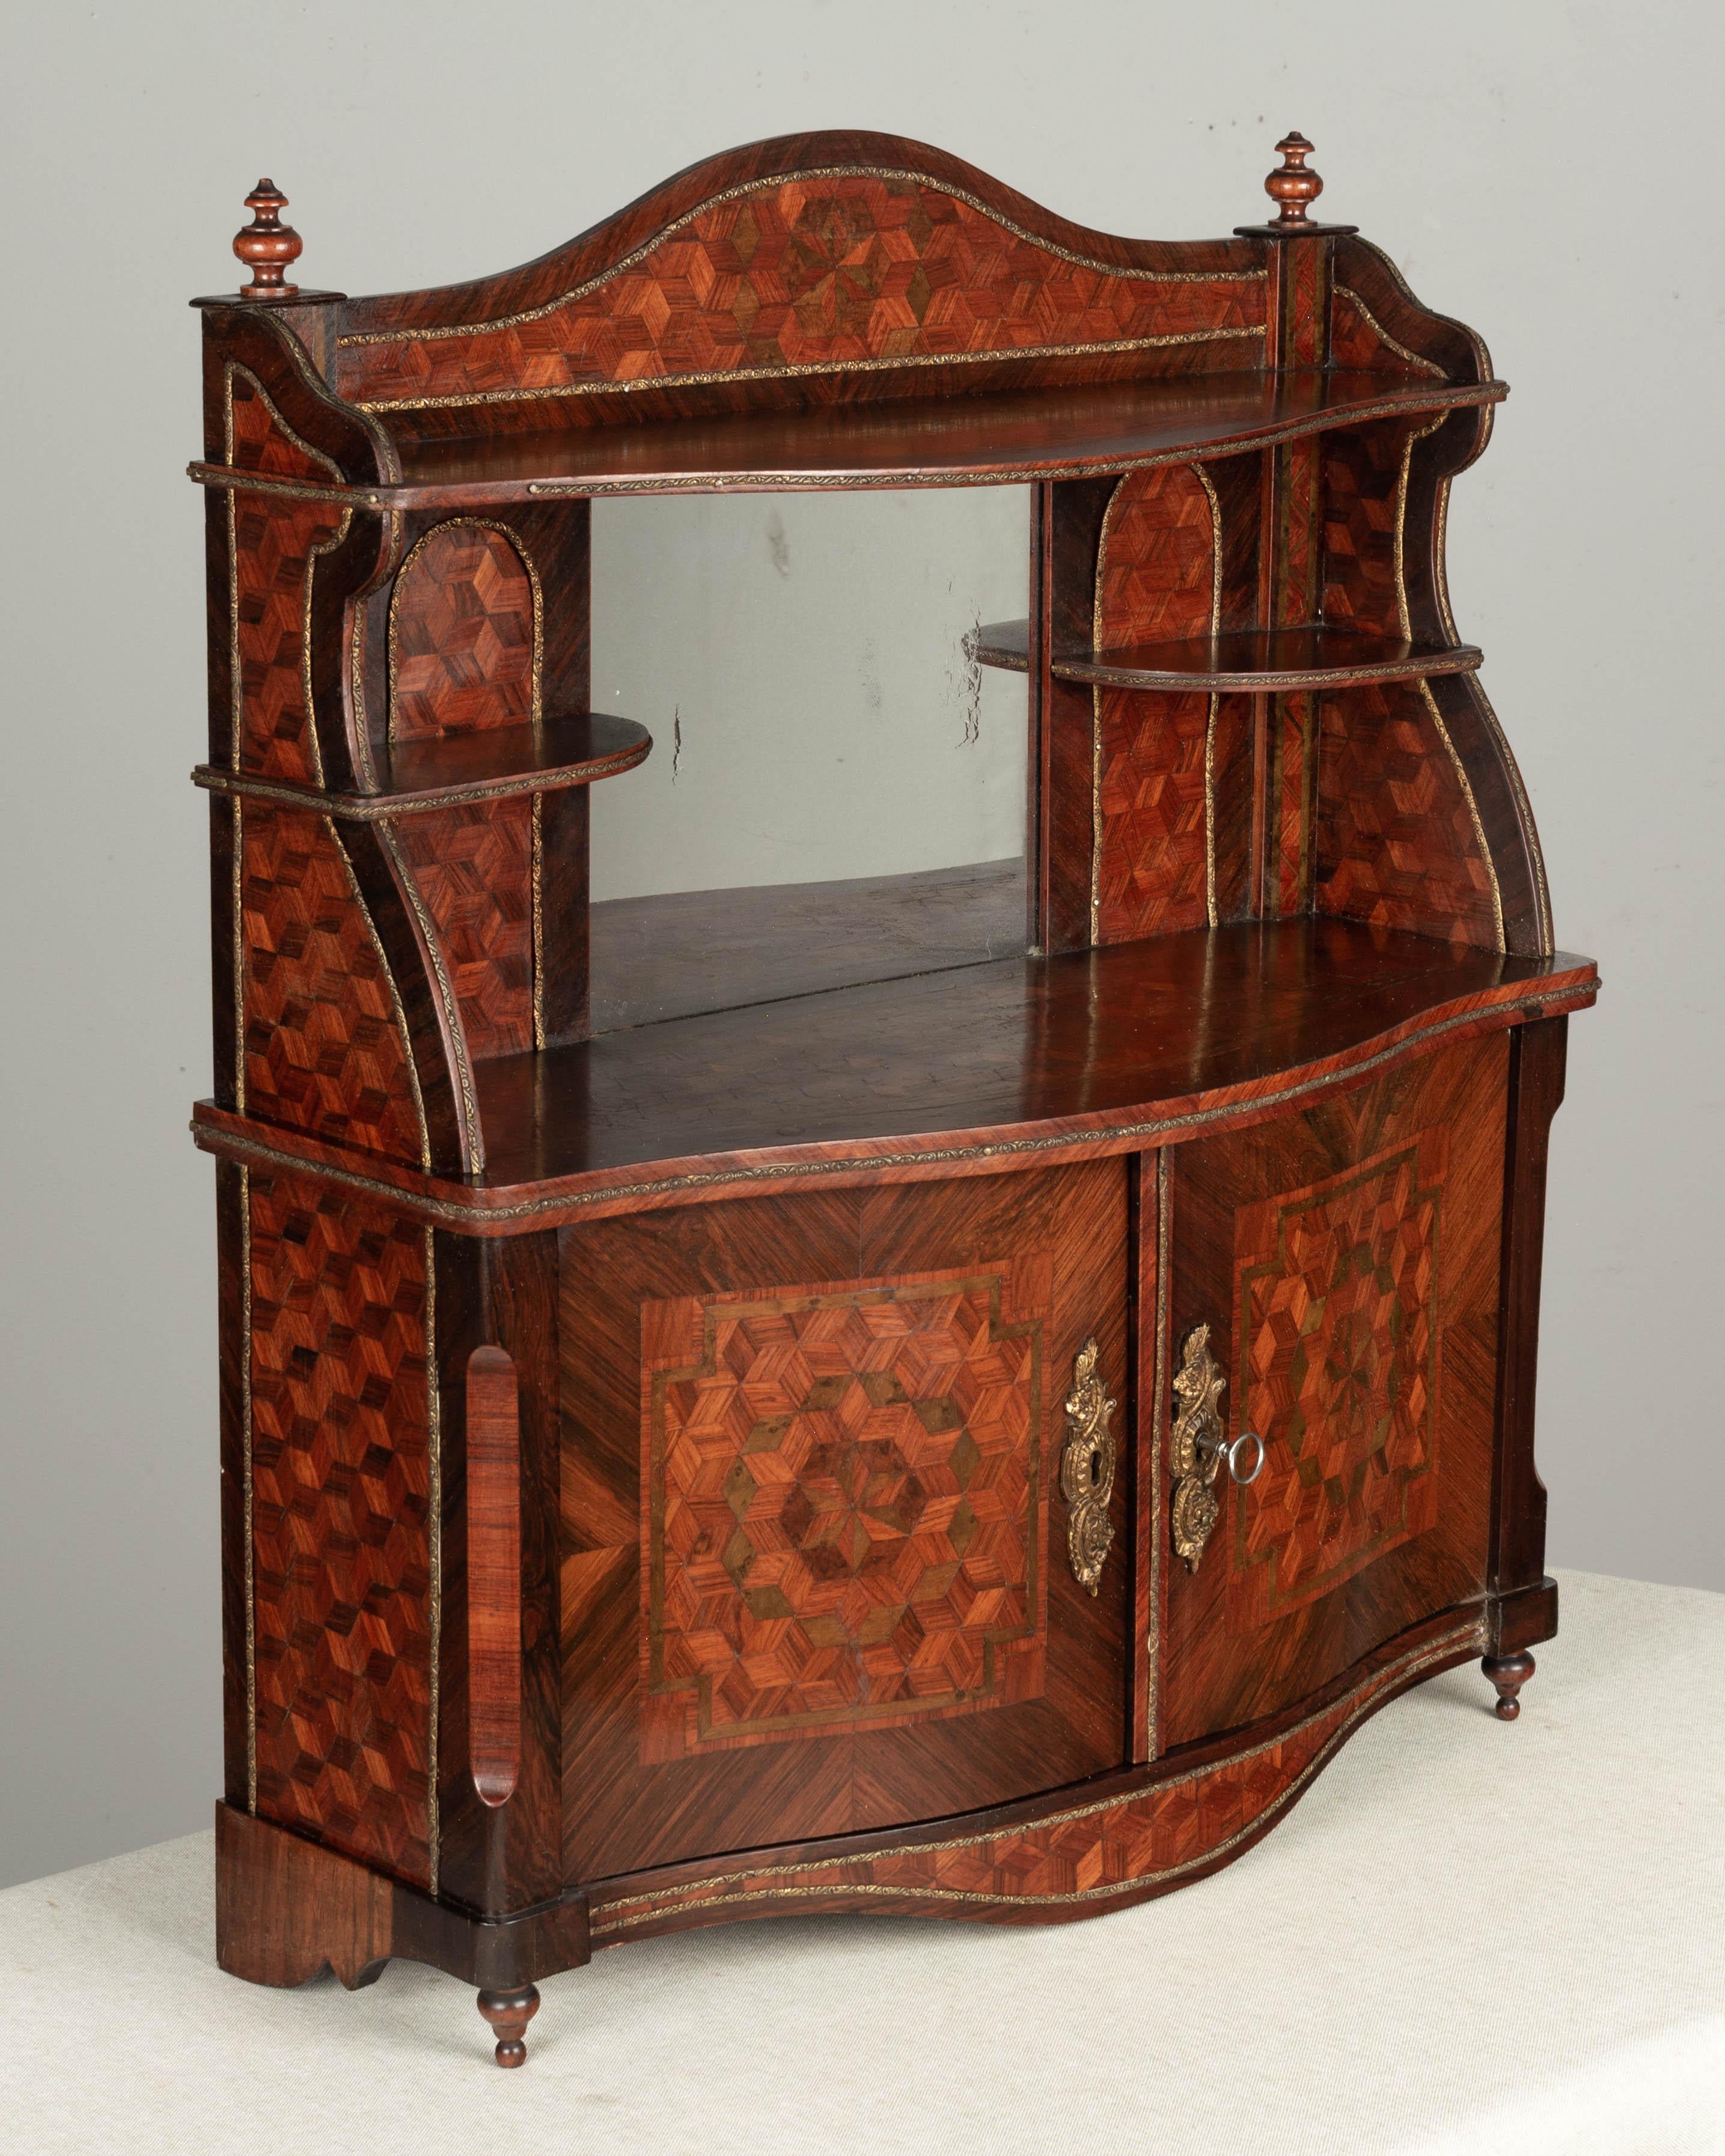 A 19th Century French Napoleon III miniature wall cabinet with fine quality marquetry inlay of rosewood, walnut and mahogany. Beautifully detailed with brass trim and escutcheons and turned finials. Mirror with old silvering. Working lock and key.